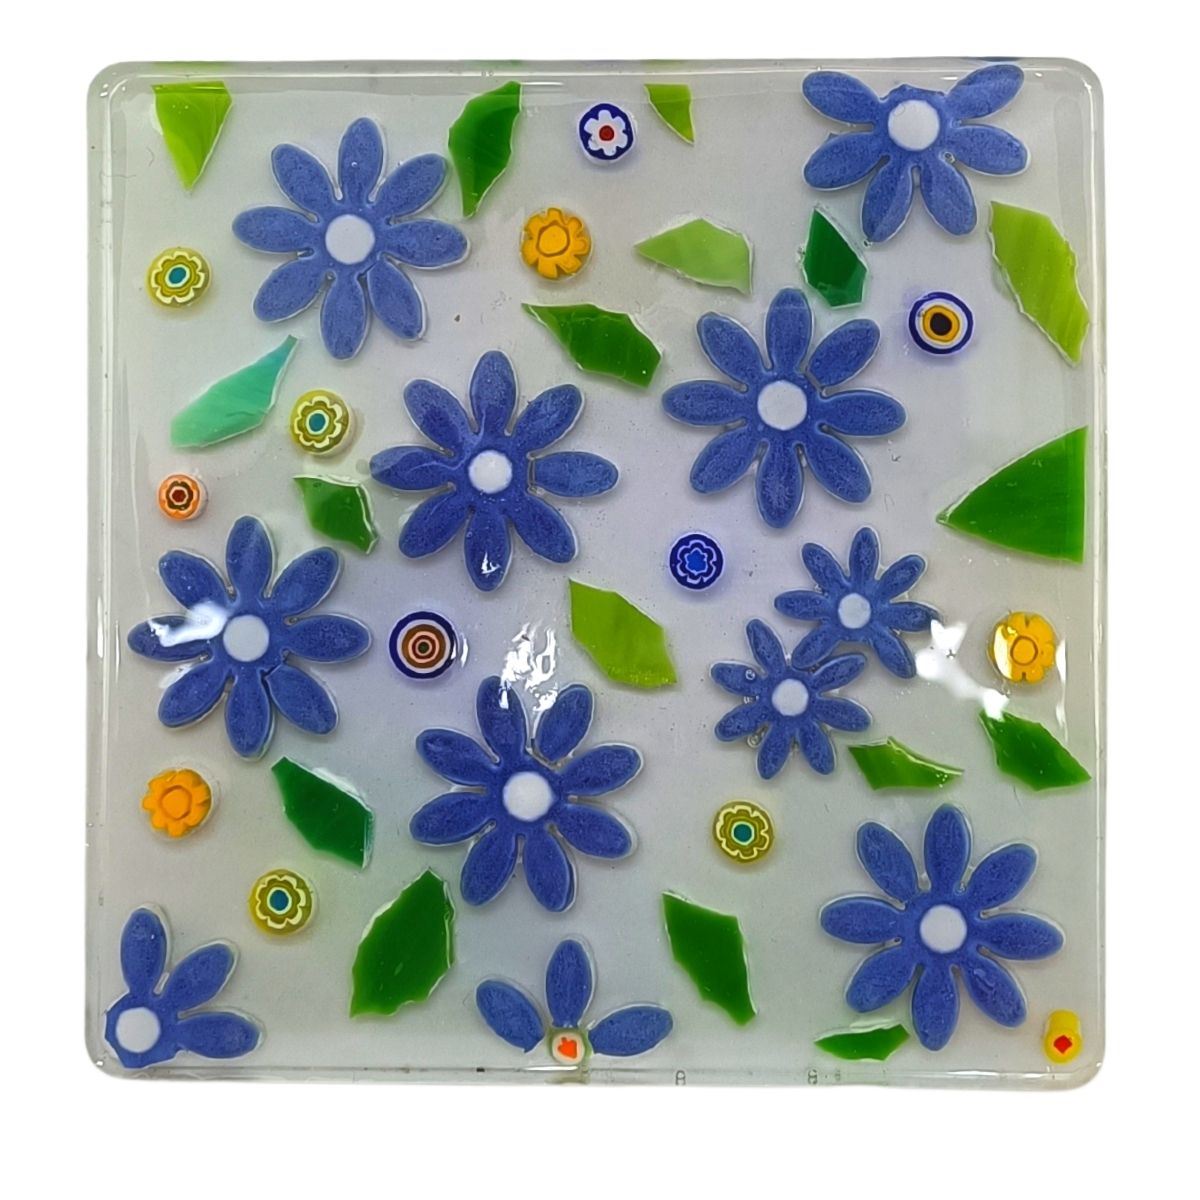 Base - Silicone Mould - 85mm Square